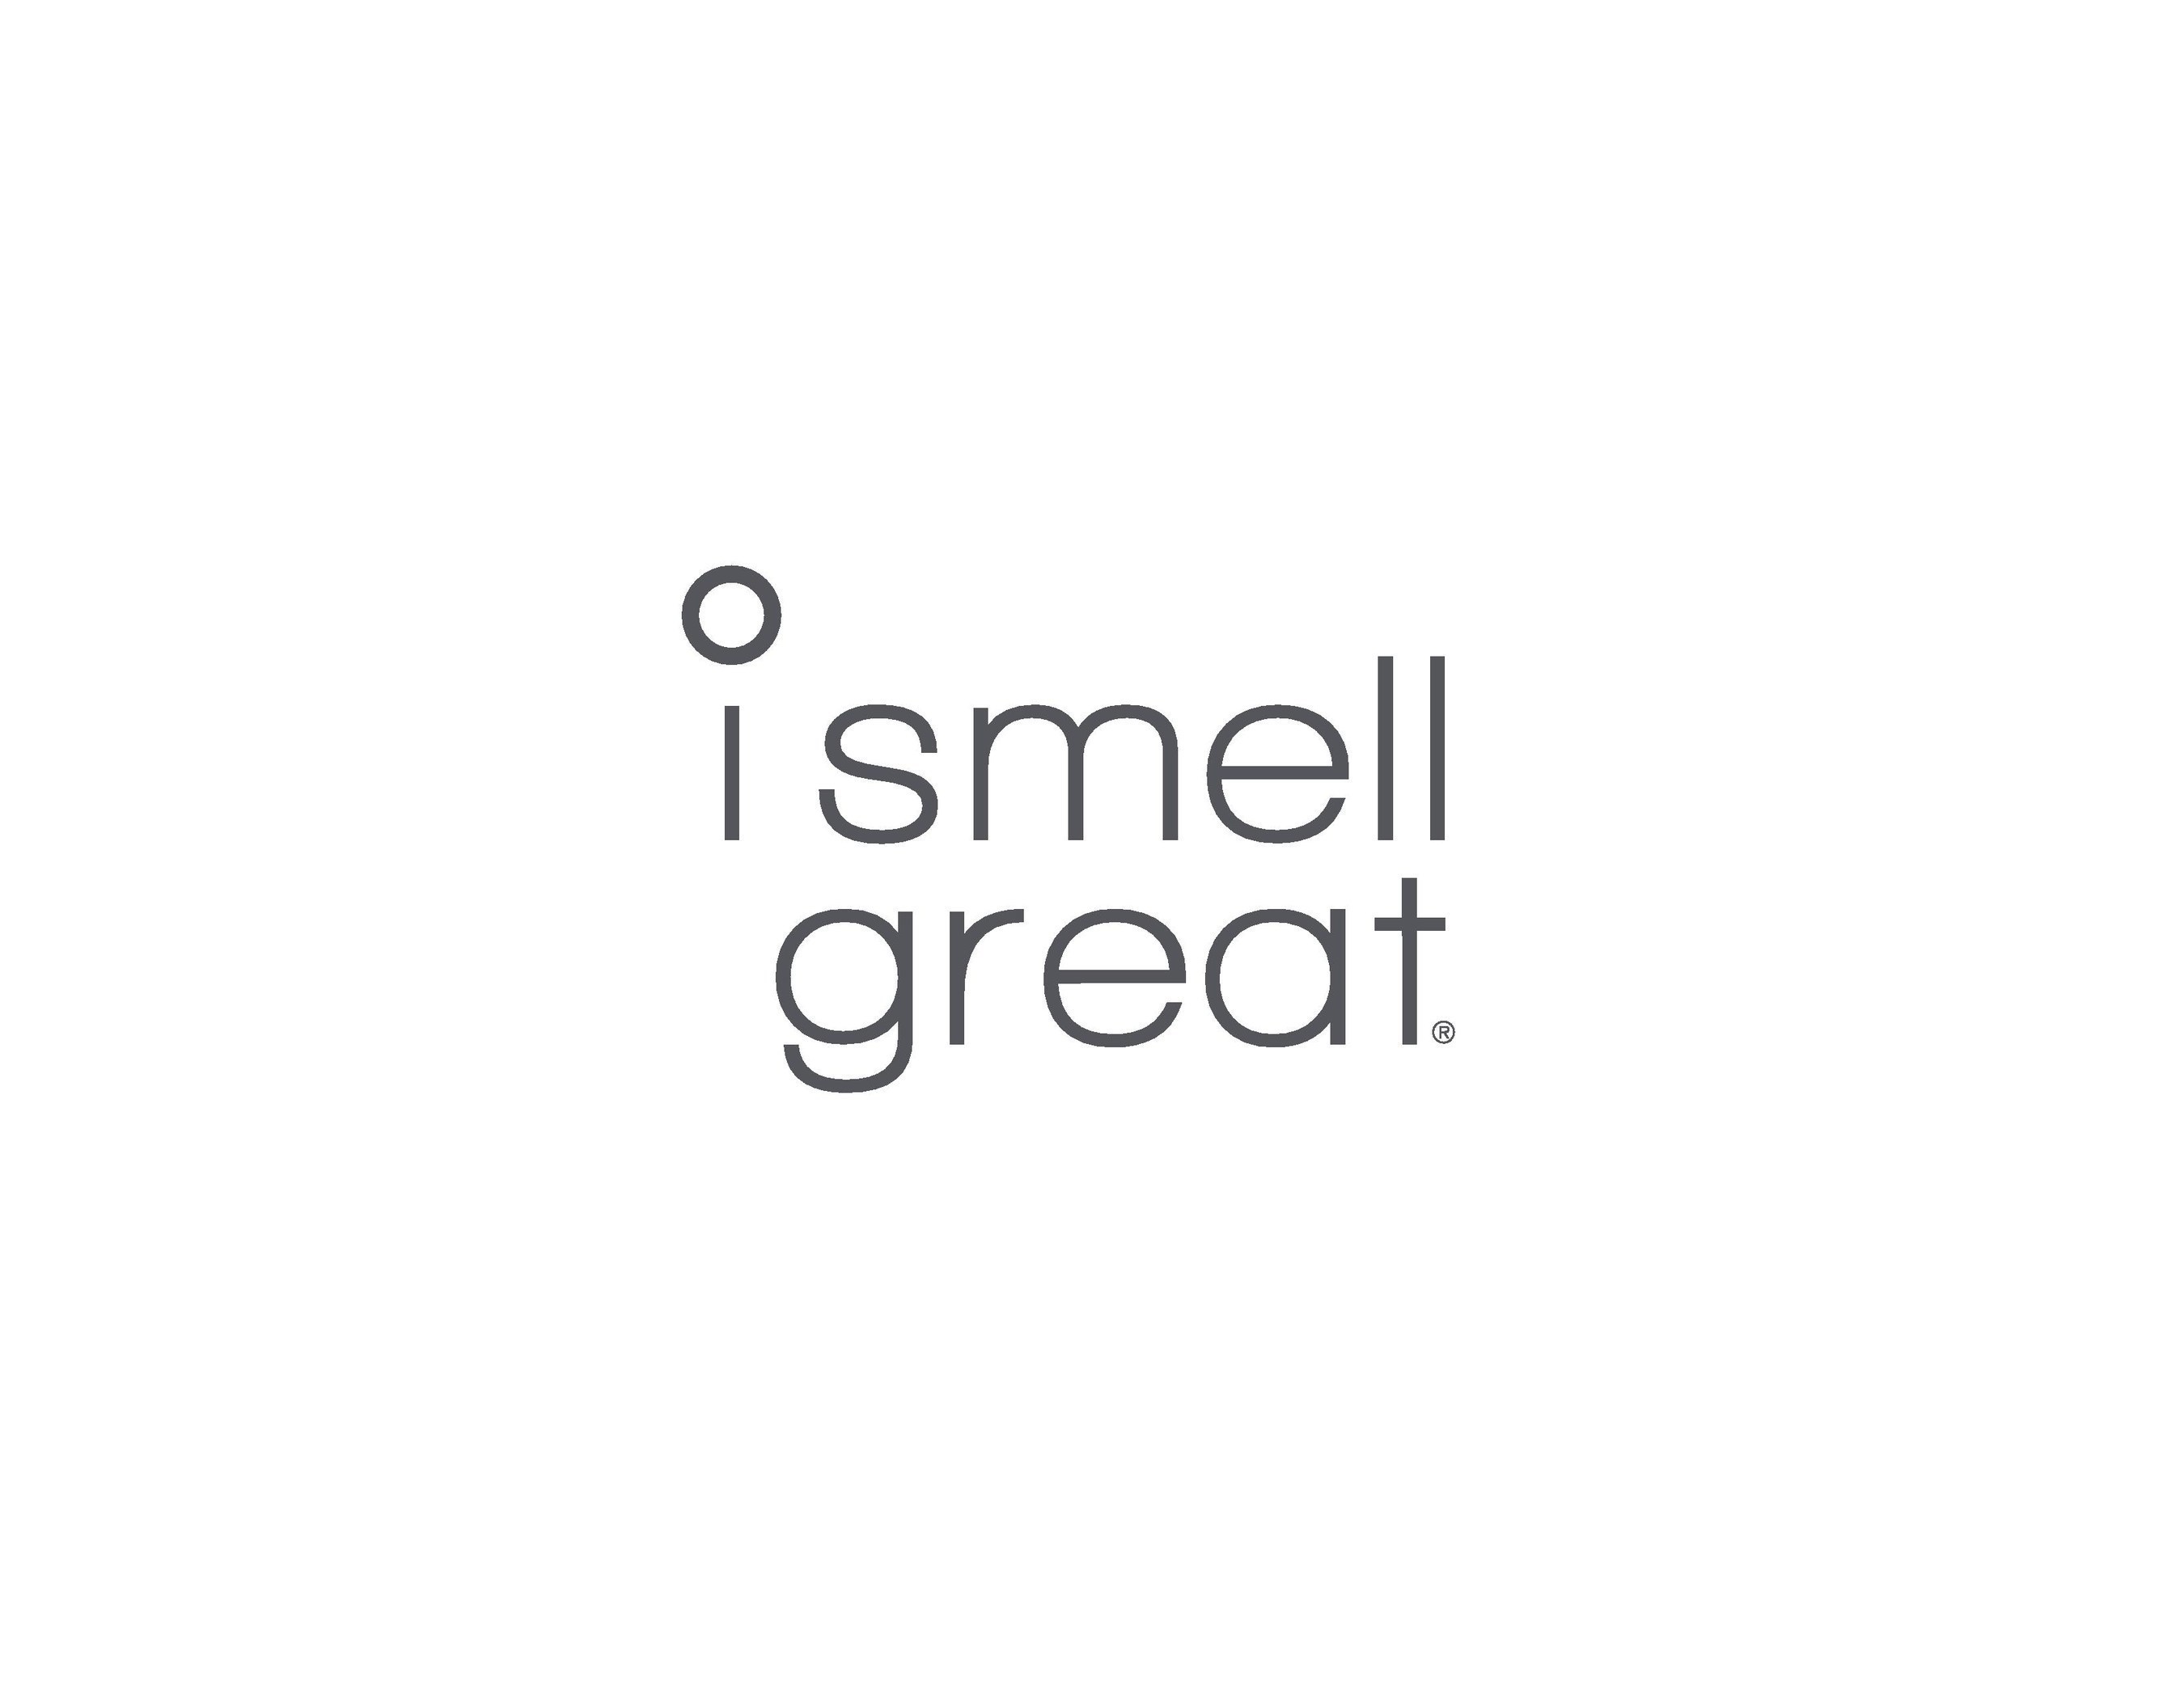 RANDI SHINDER LAUNCHES i smell great A NEW BEAUTY LINE